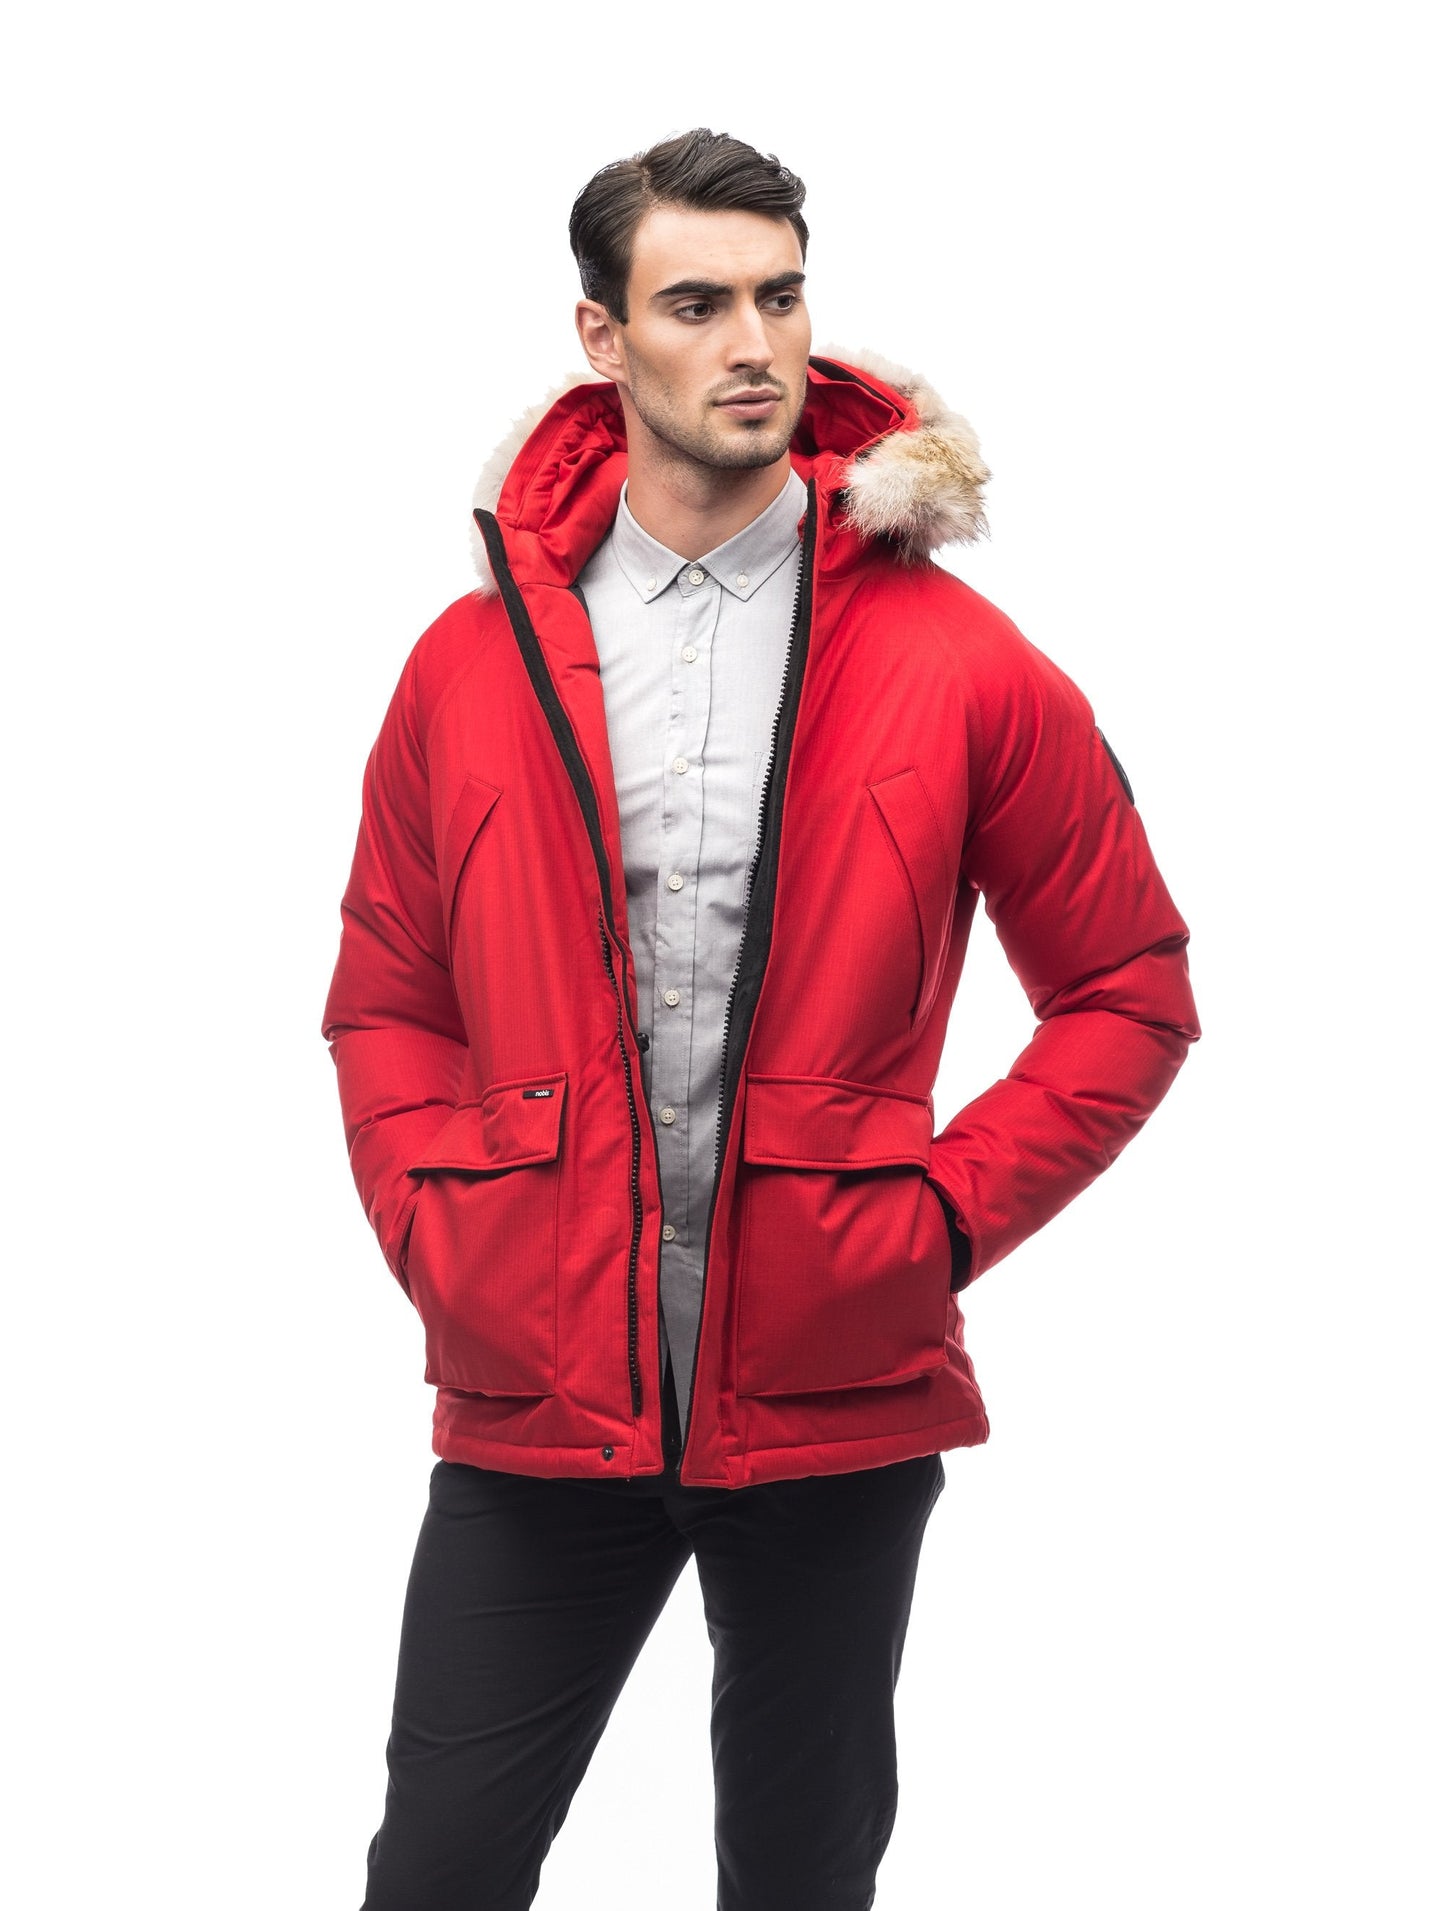 Men's waist length down filled jacket with two front pockets with magnetic closure and a removable fur trim on the hood in CH Red